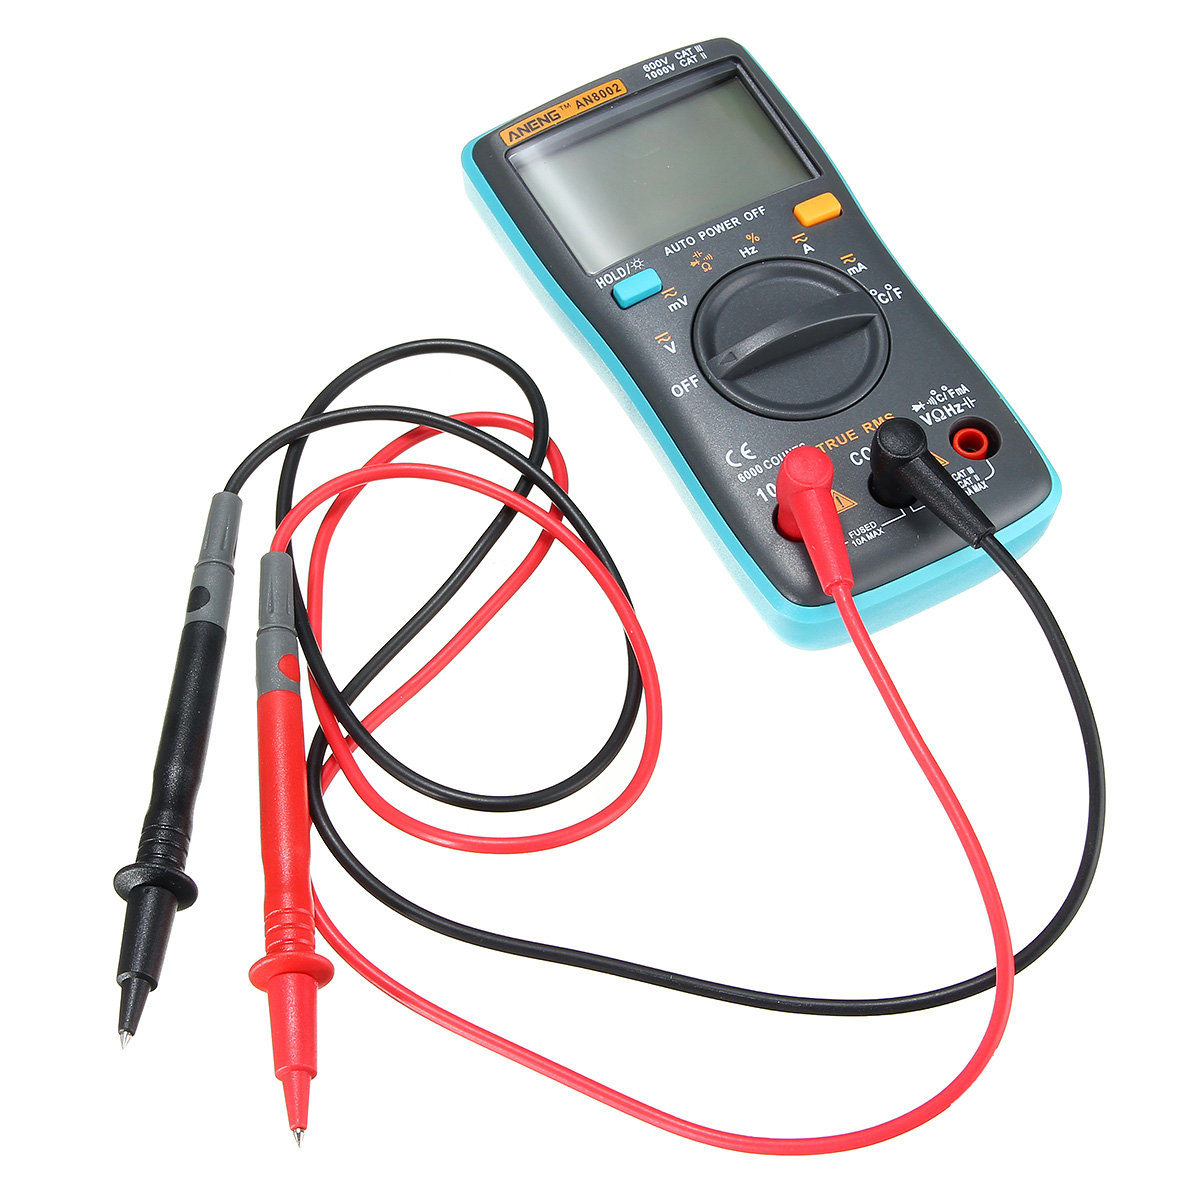 ANENG AN8002 Digital True RMS 6000 Counts Multimeter AC/DC Current Voltage Frequency Resistance Temperature Tester ℃/℉ 19